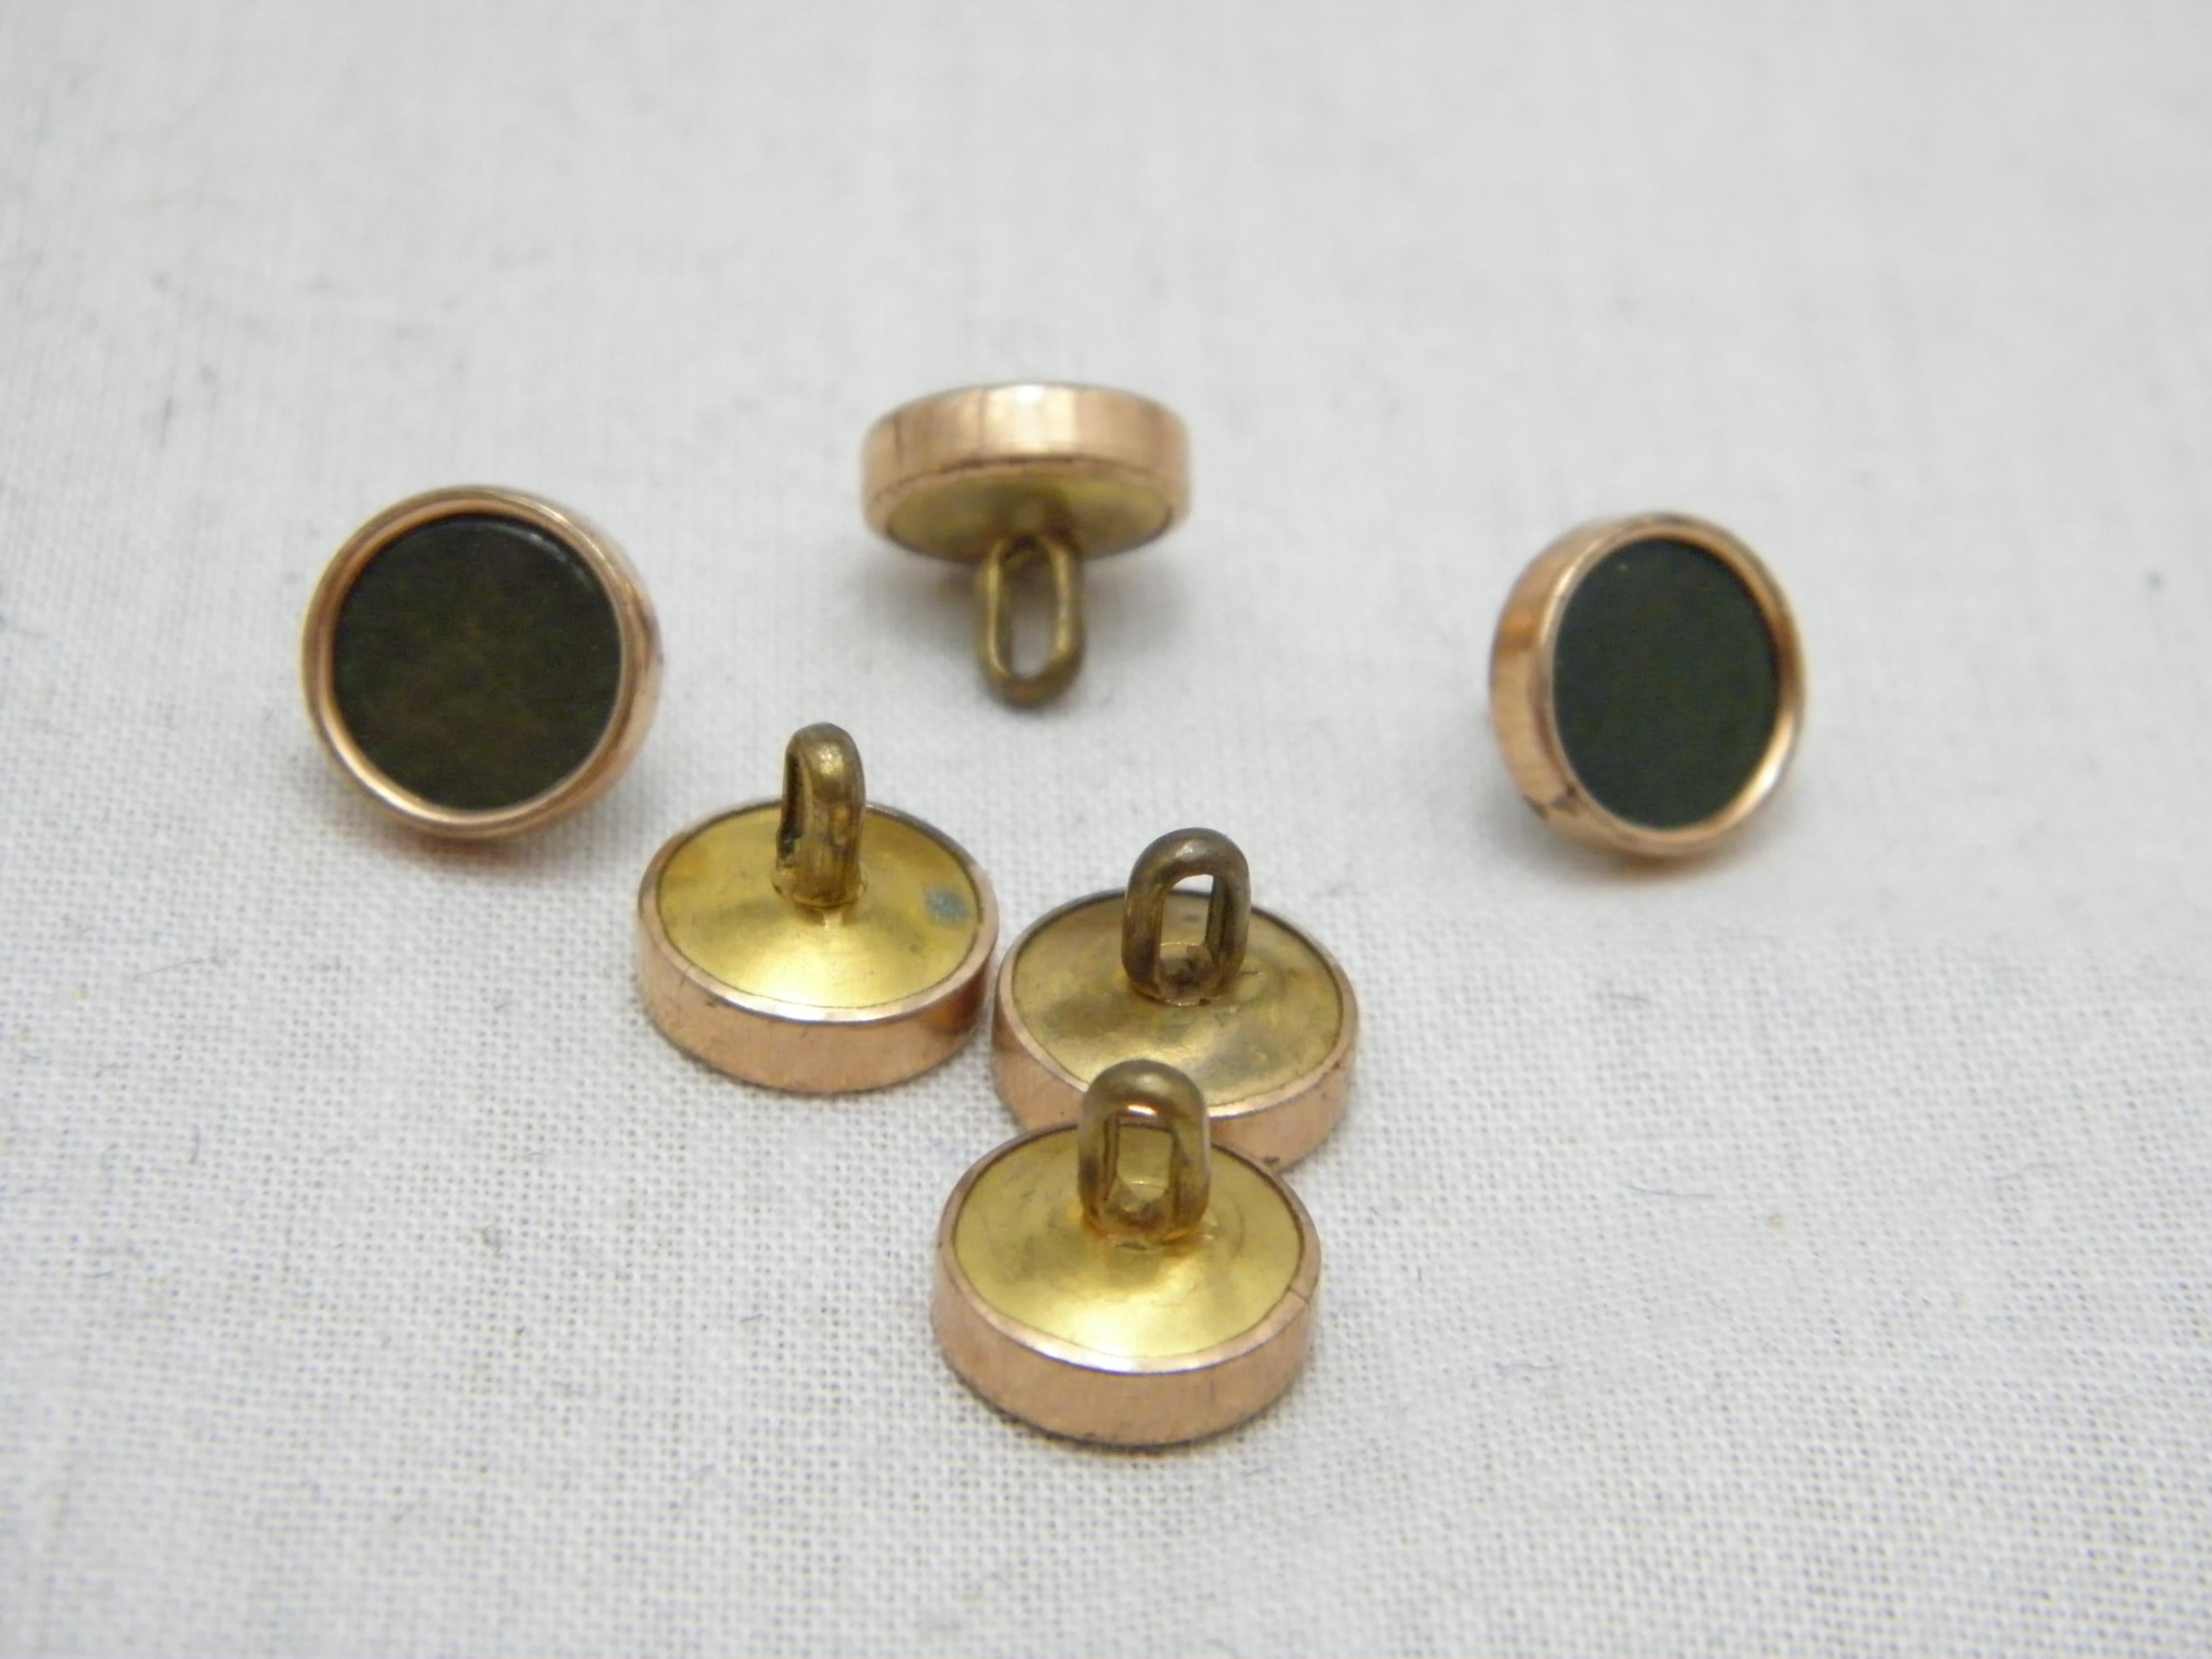 Bargain Antique 15ct Rose Gold Green Weave Shirt Studs Buttons c1880 625 Purity For Sale 3